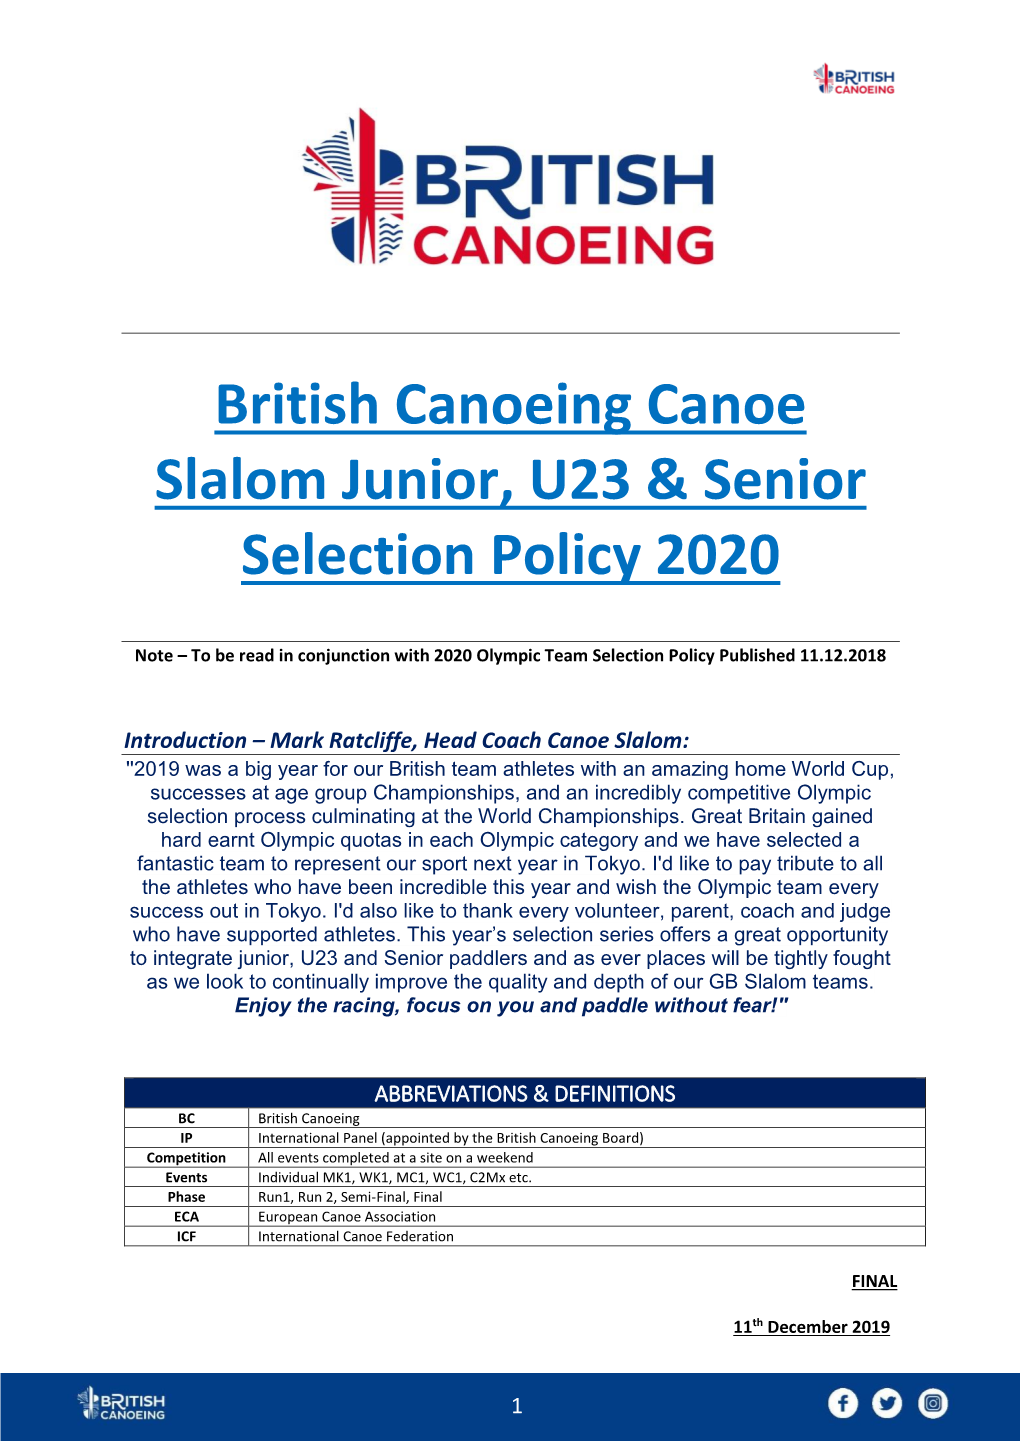 Selection Policy 2020